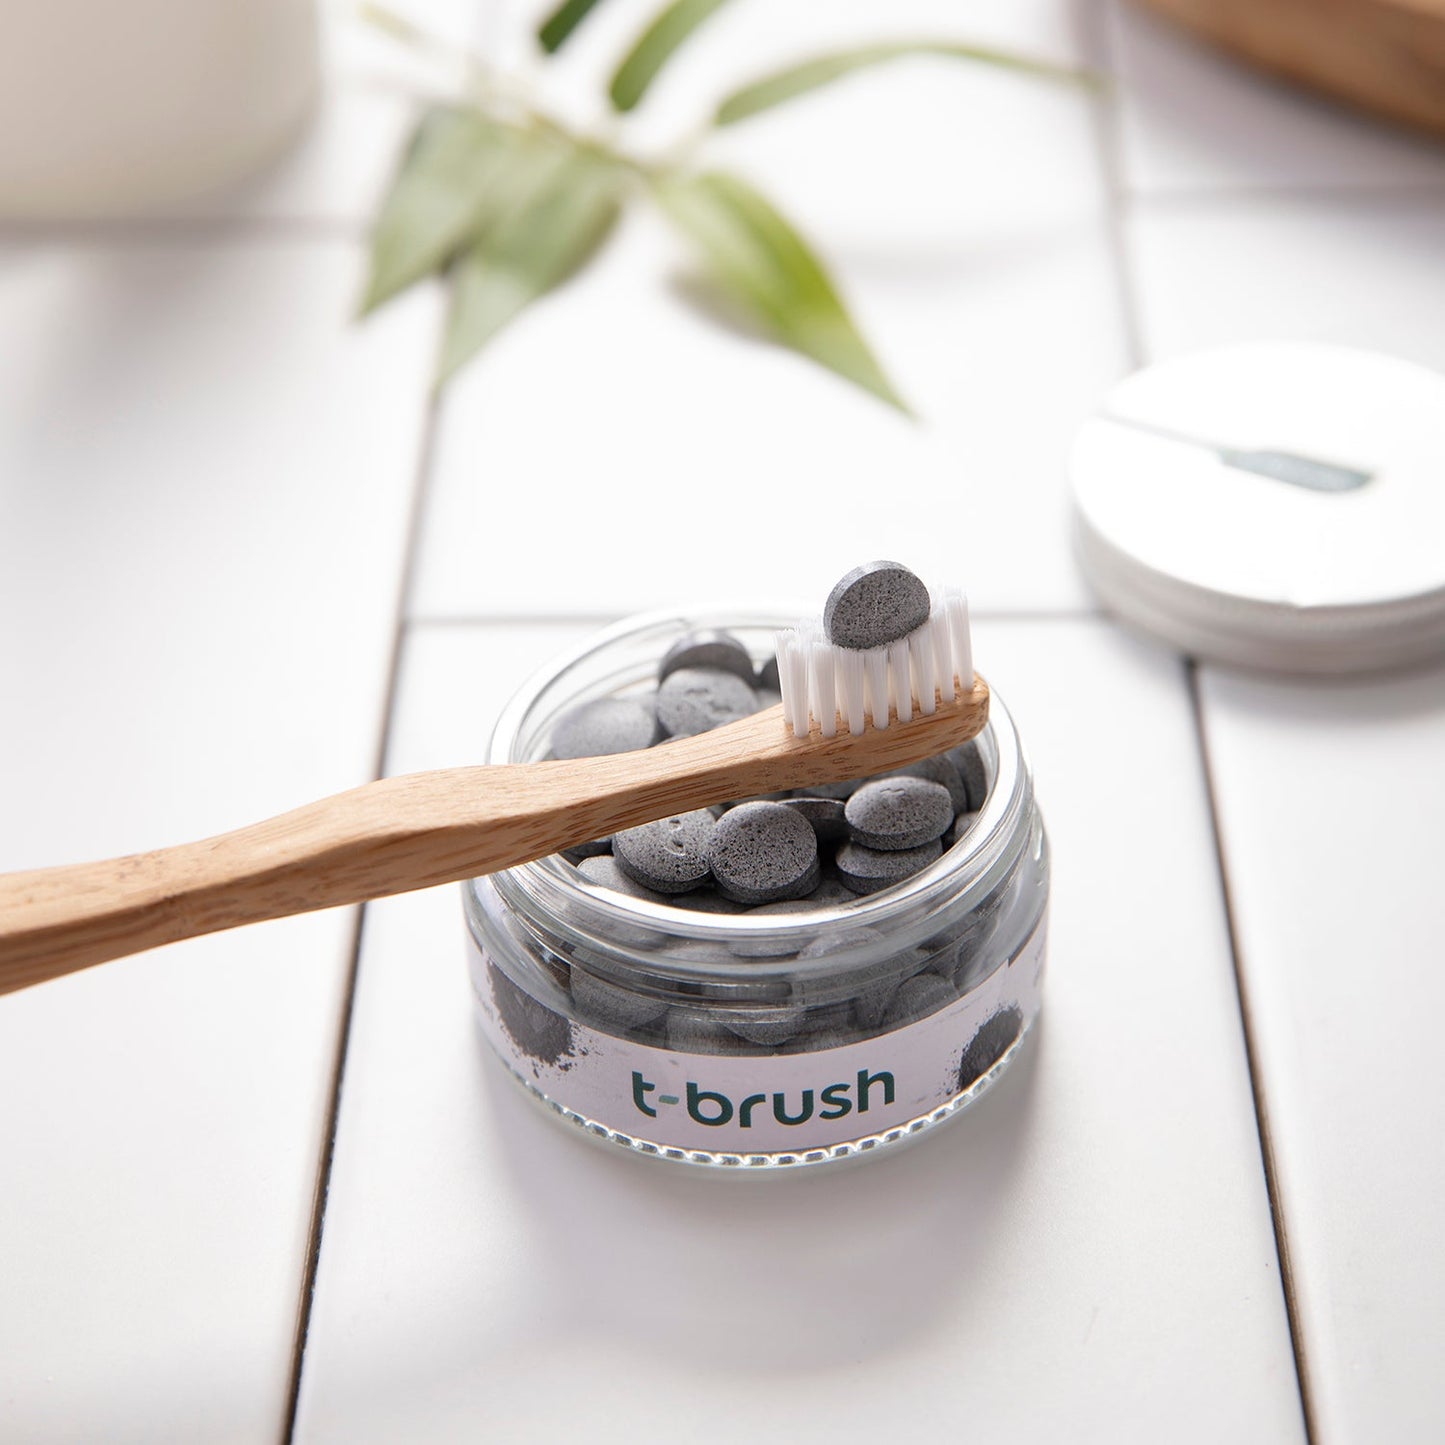 T-Brush Activated Charcoal Toothpaste Tablet - Fluoride - Attily - #boycott #فلسطين #palestine